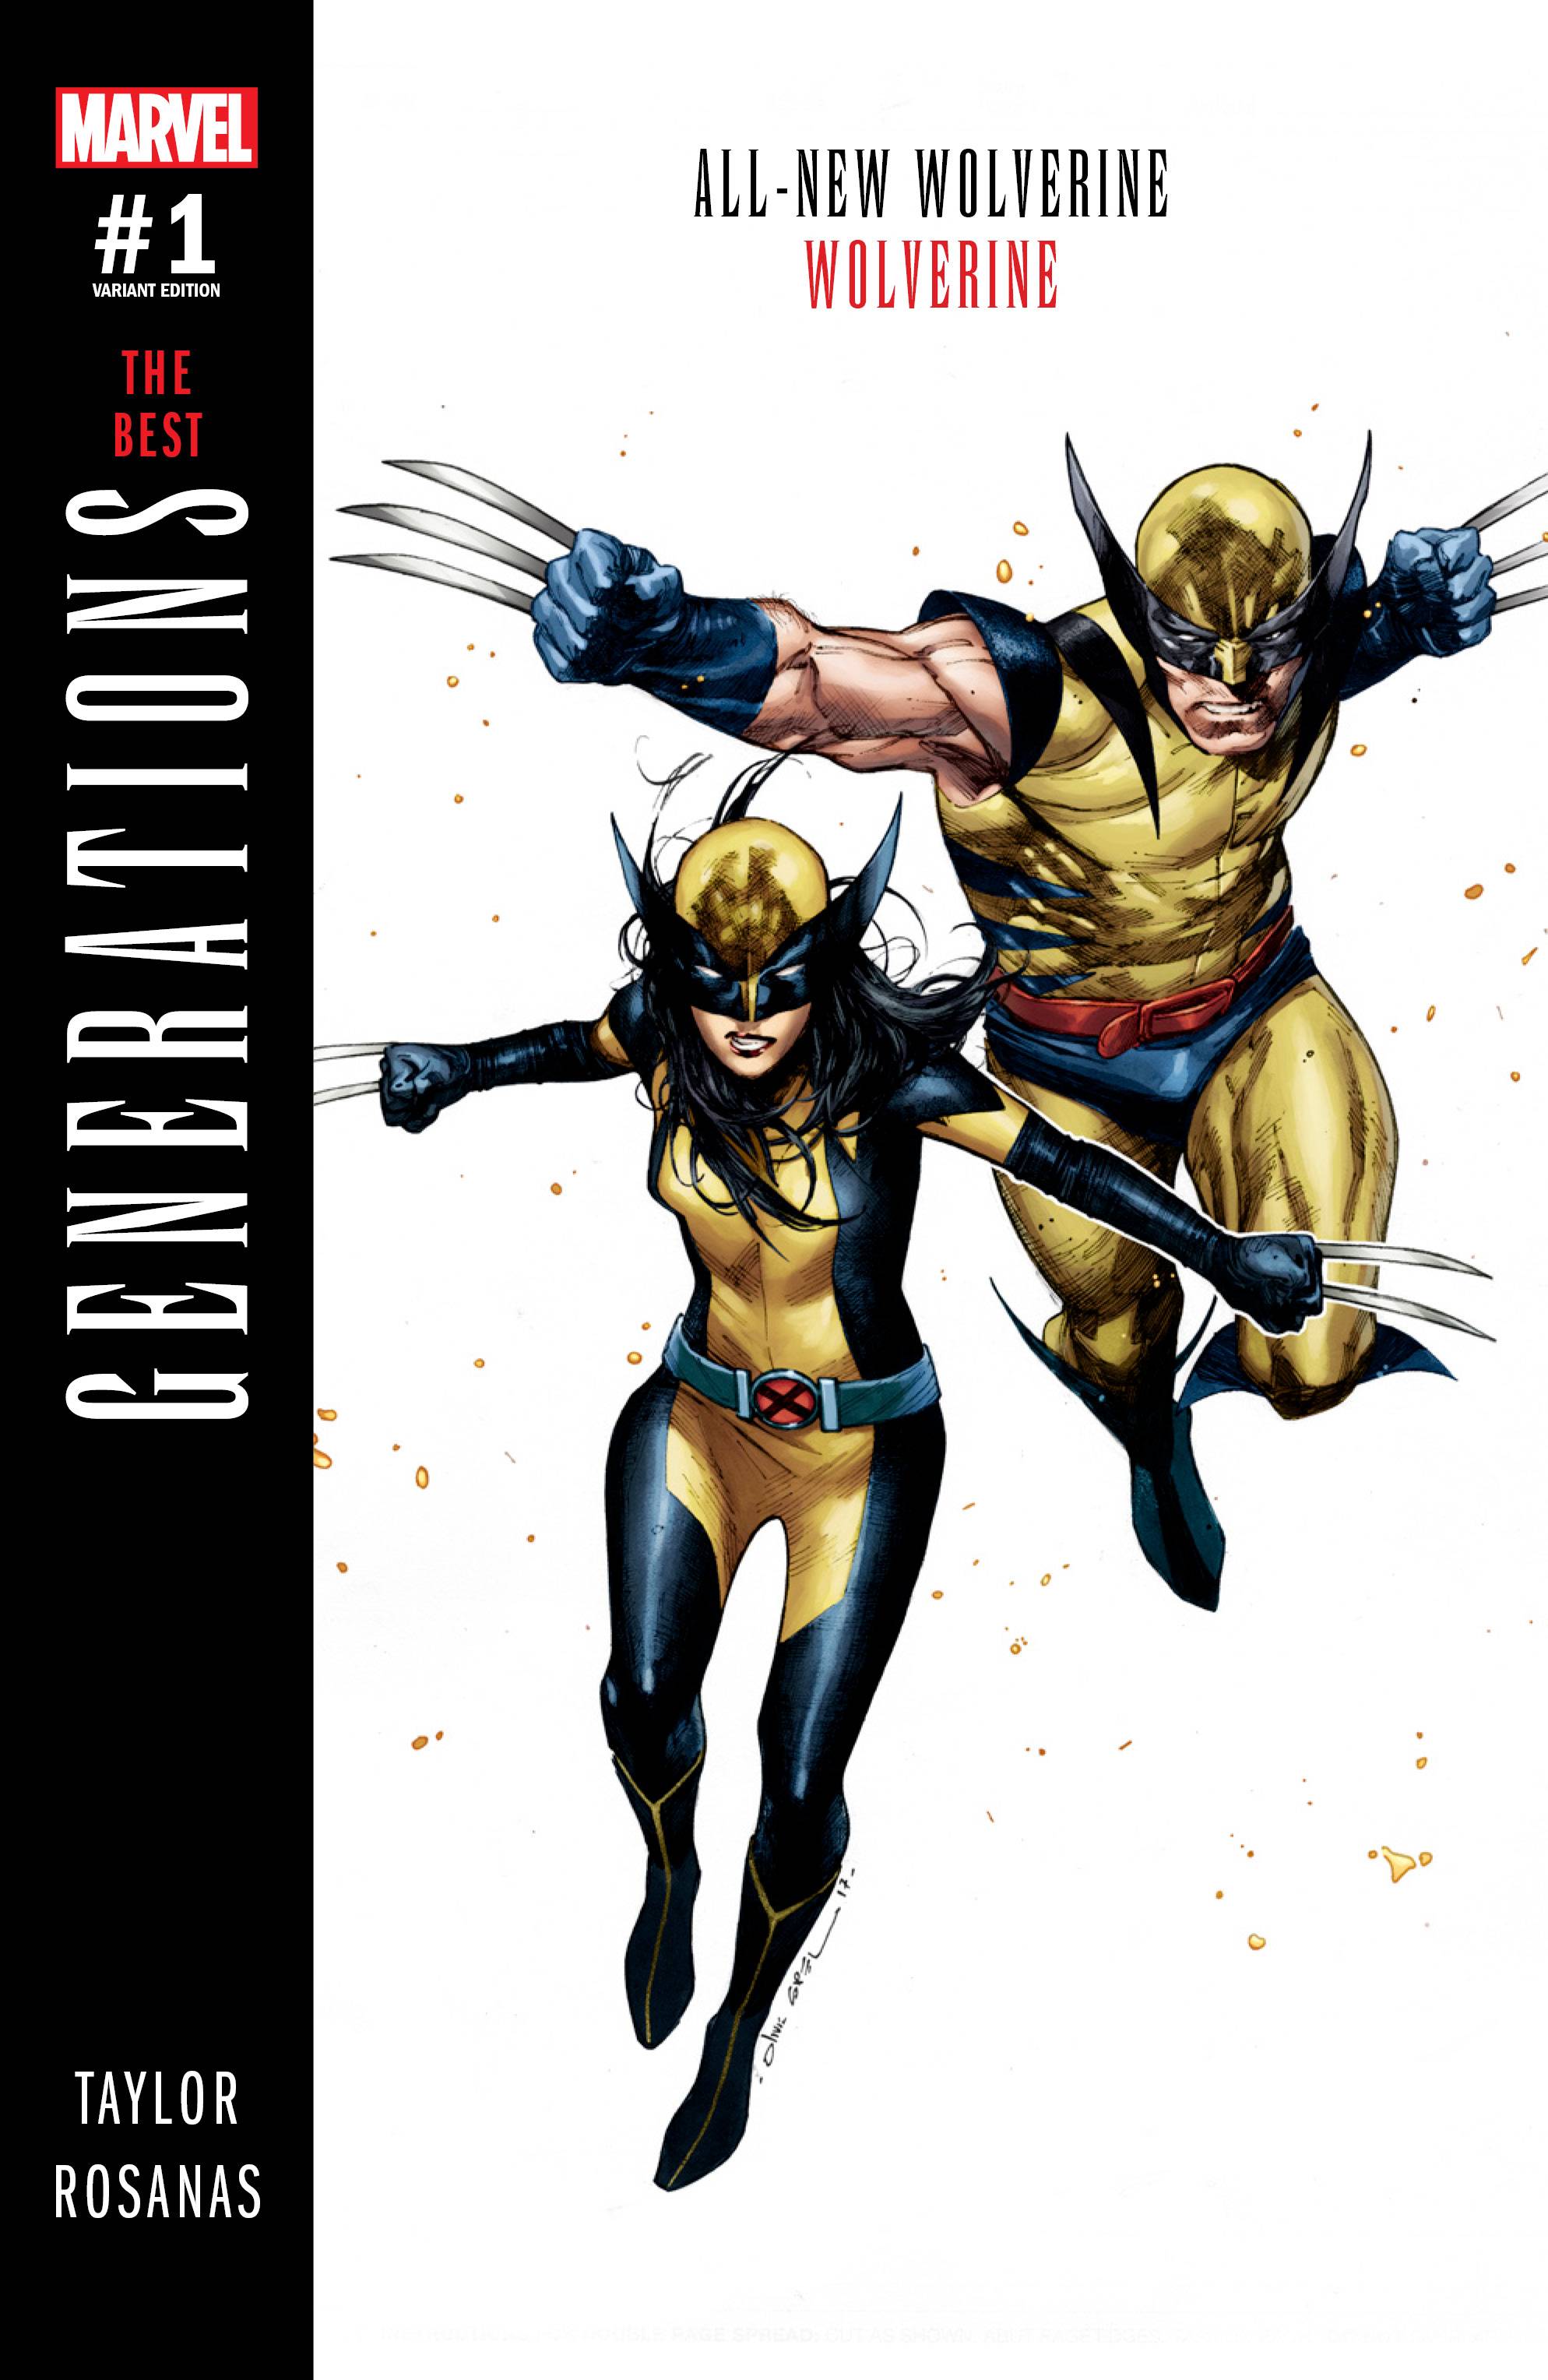 GENERATIONS: WOLVERINE AND ALL-NEW WOLVERINE#1